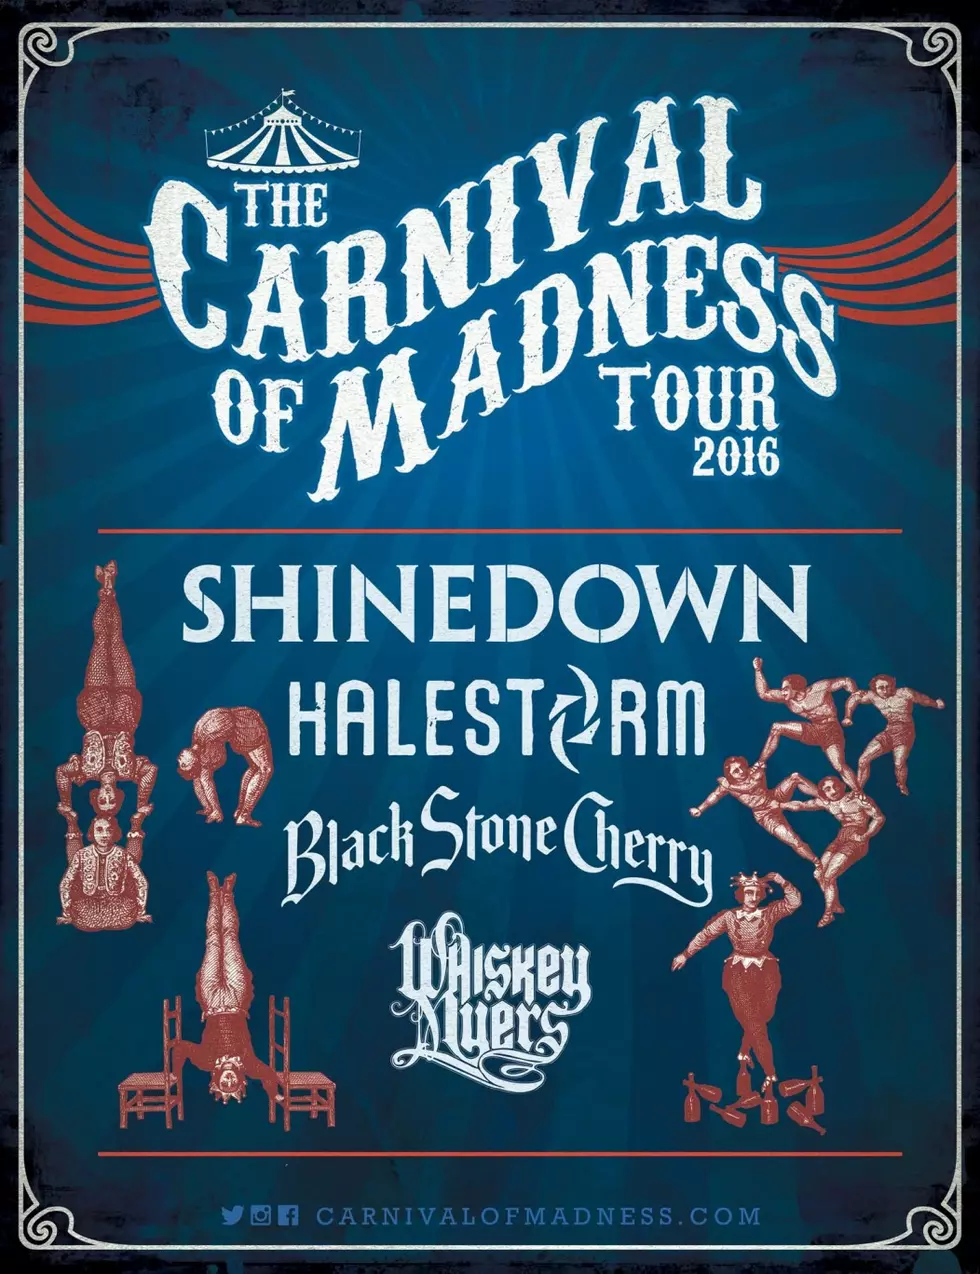 Shinedown Taps Halestorm, Black Stone Cherry, And Whiskey Myers For U.S. Carnival Of Madness